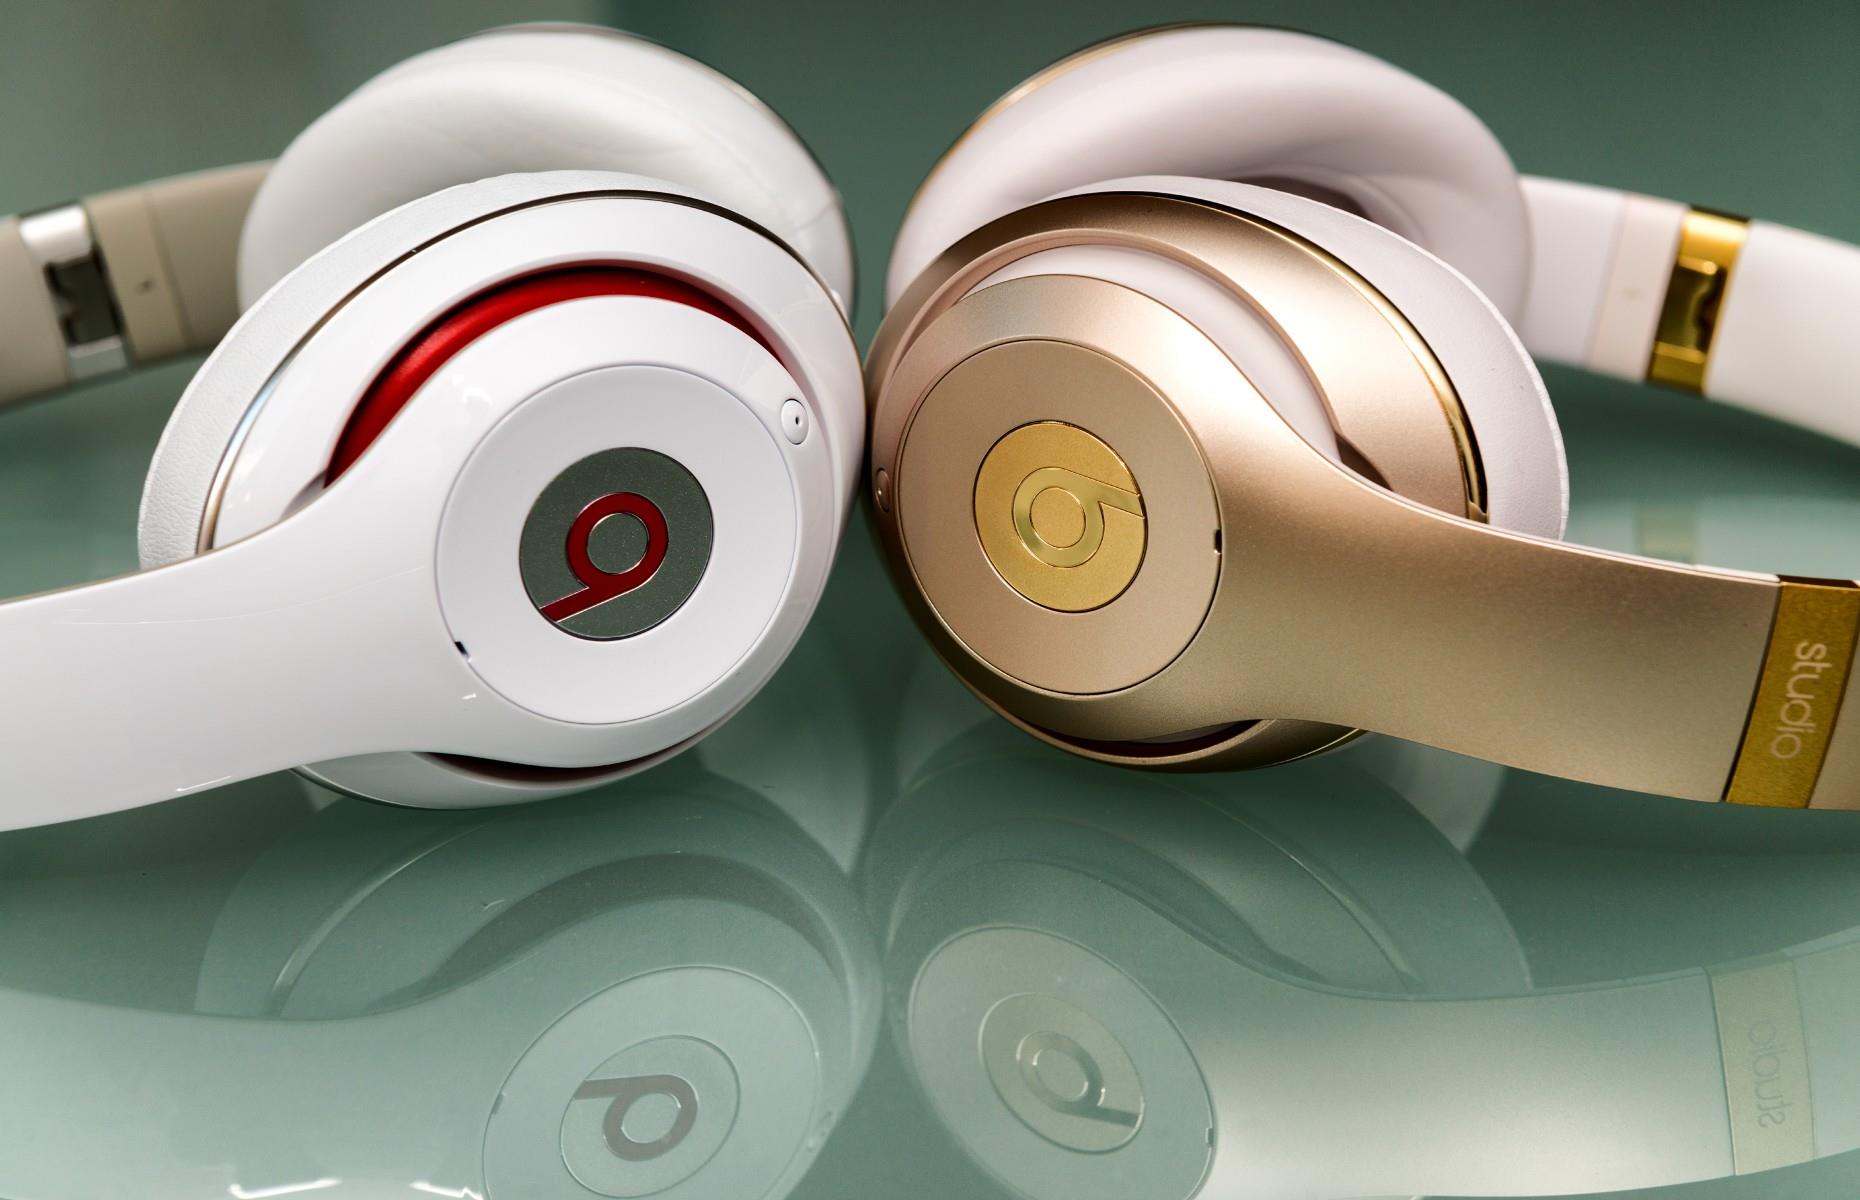 Beats by Dre: owned by Apple